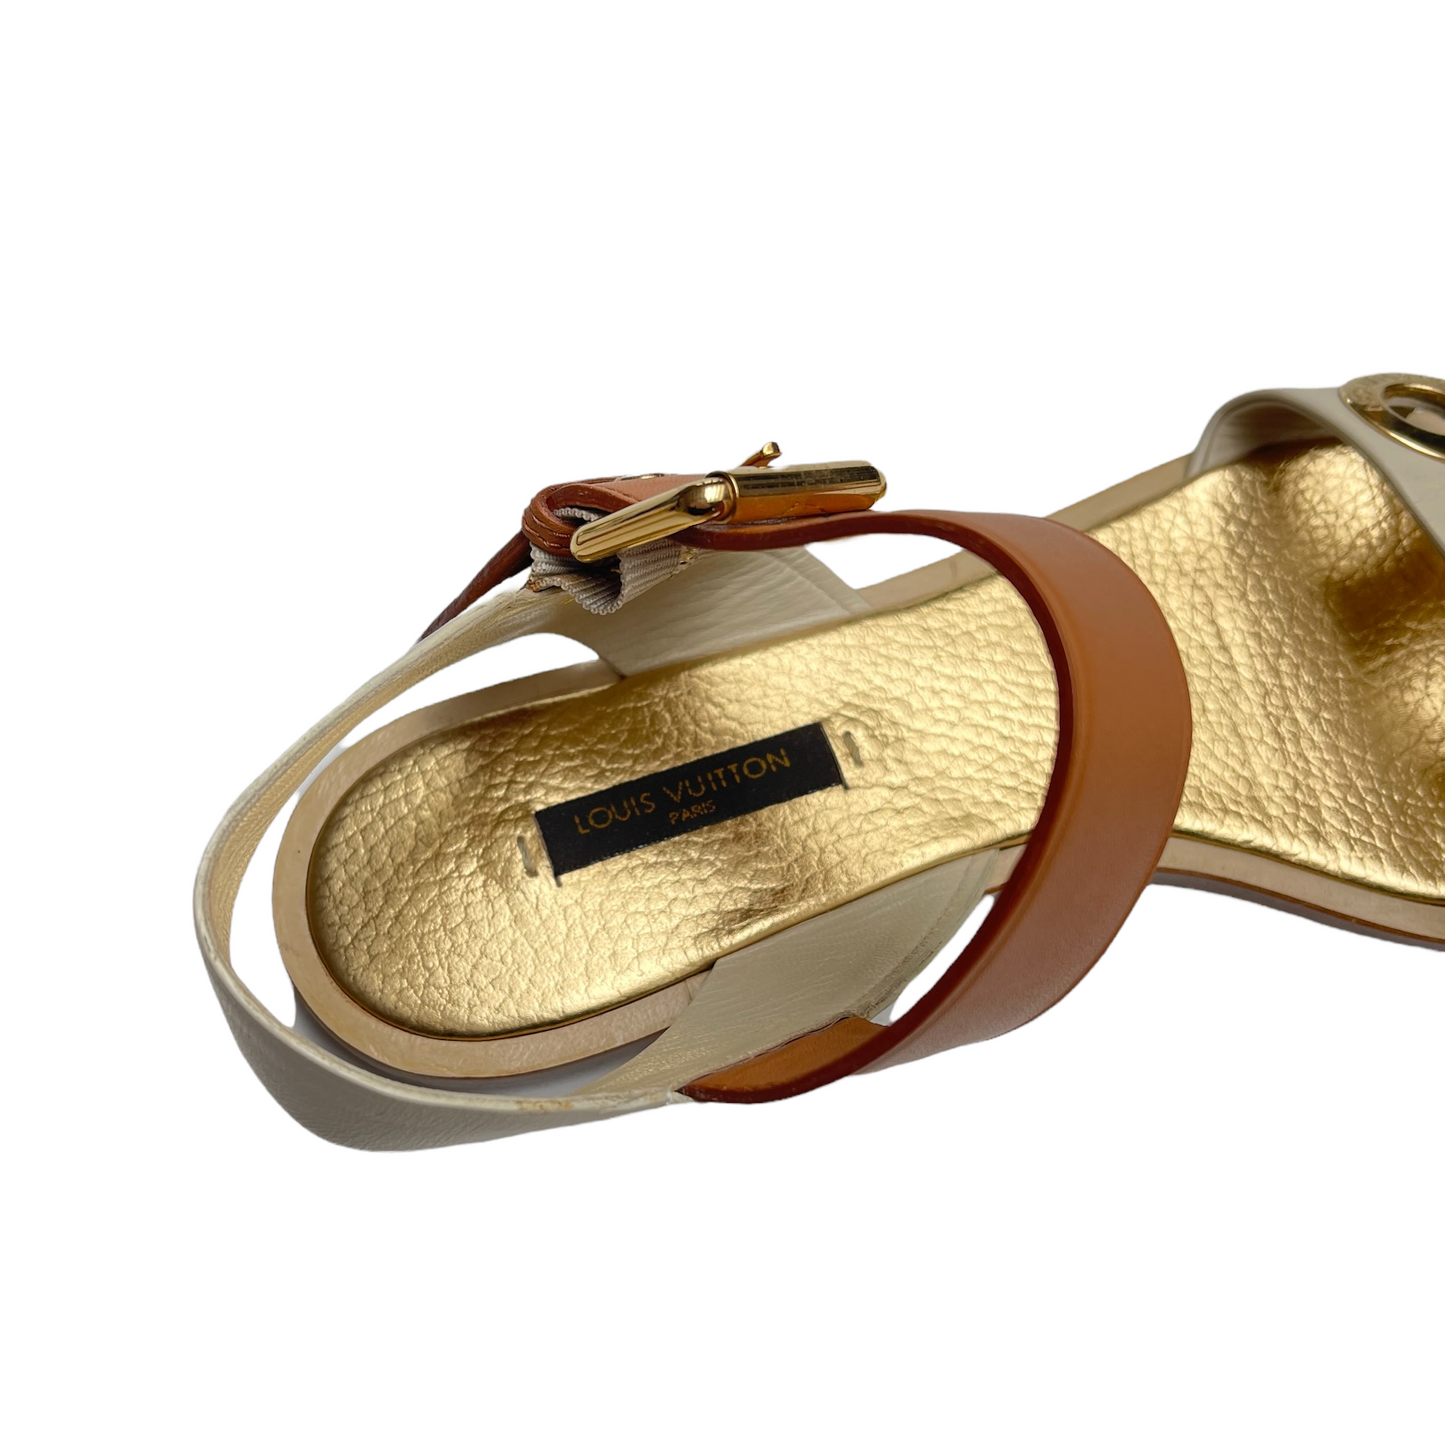 Gold Leather Sandals - 7.5